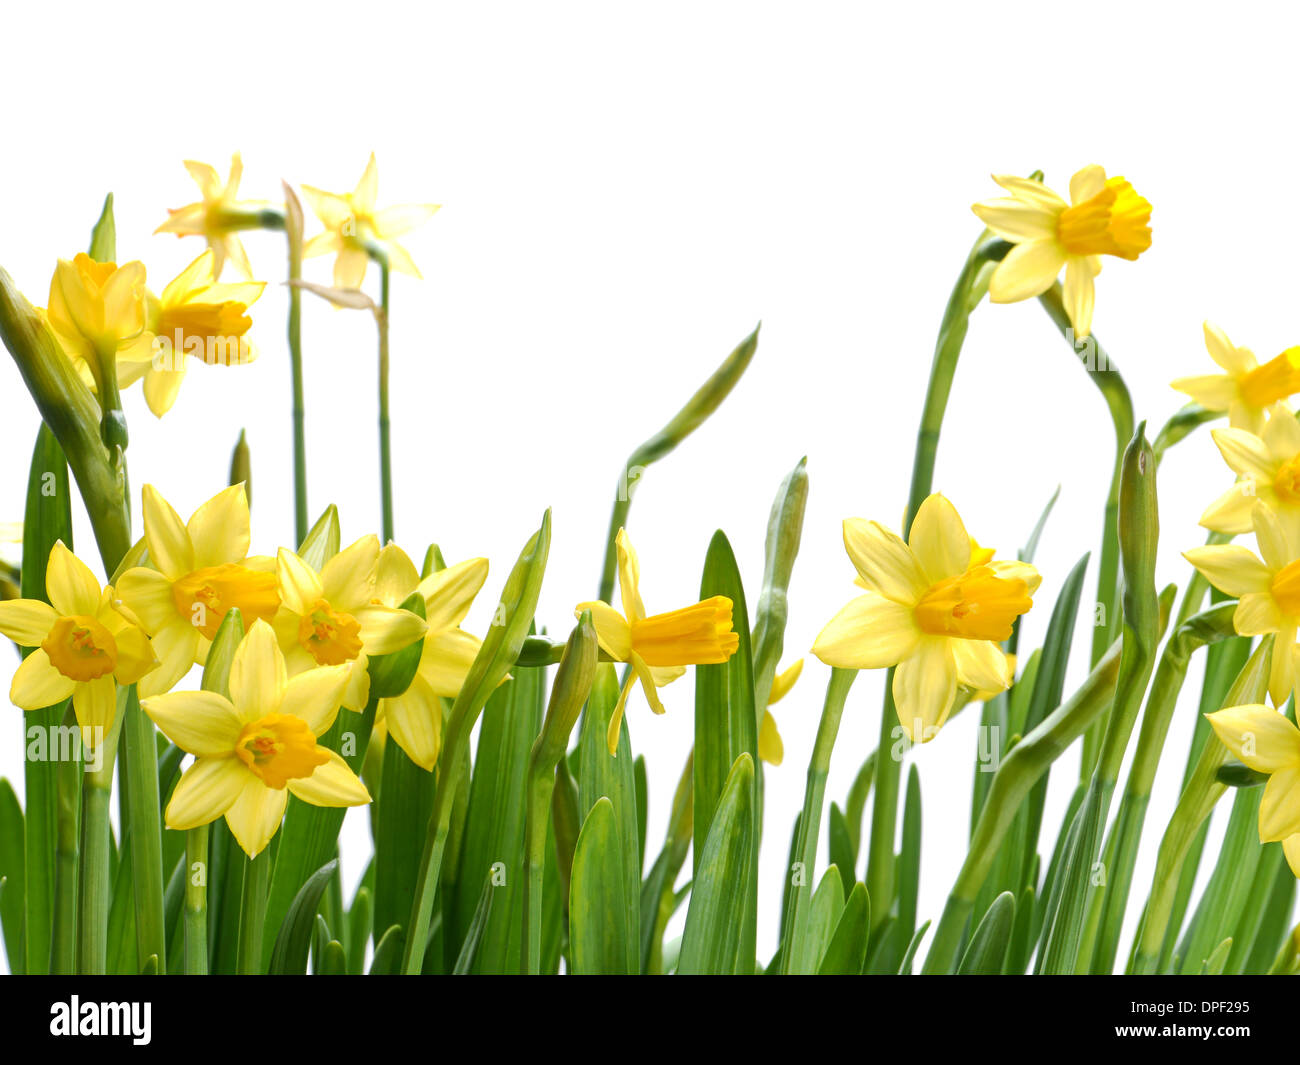 Bunch of fresh garden daffodils over white background Stock Photo